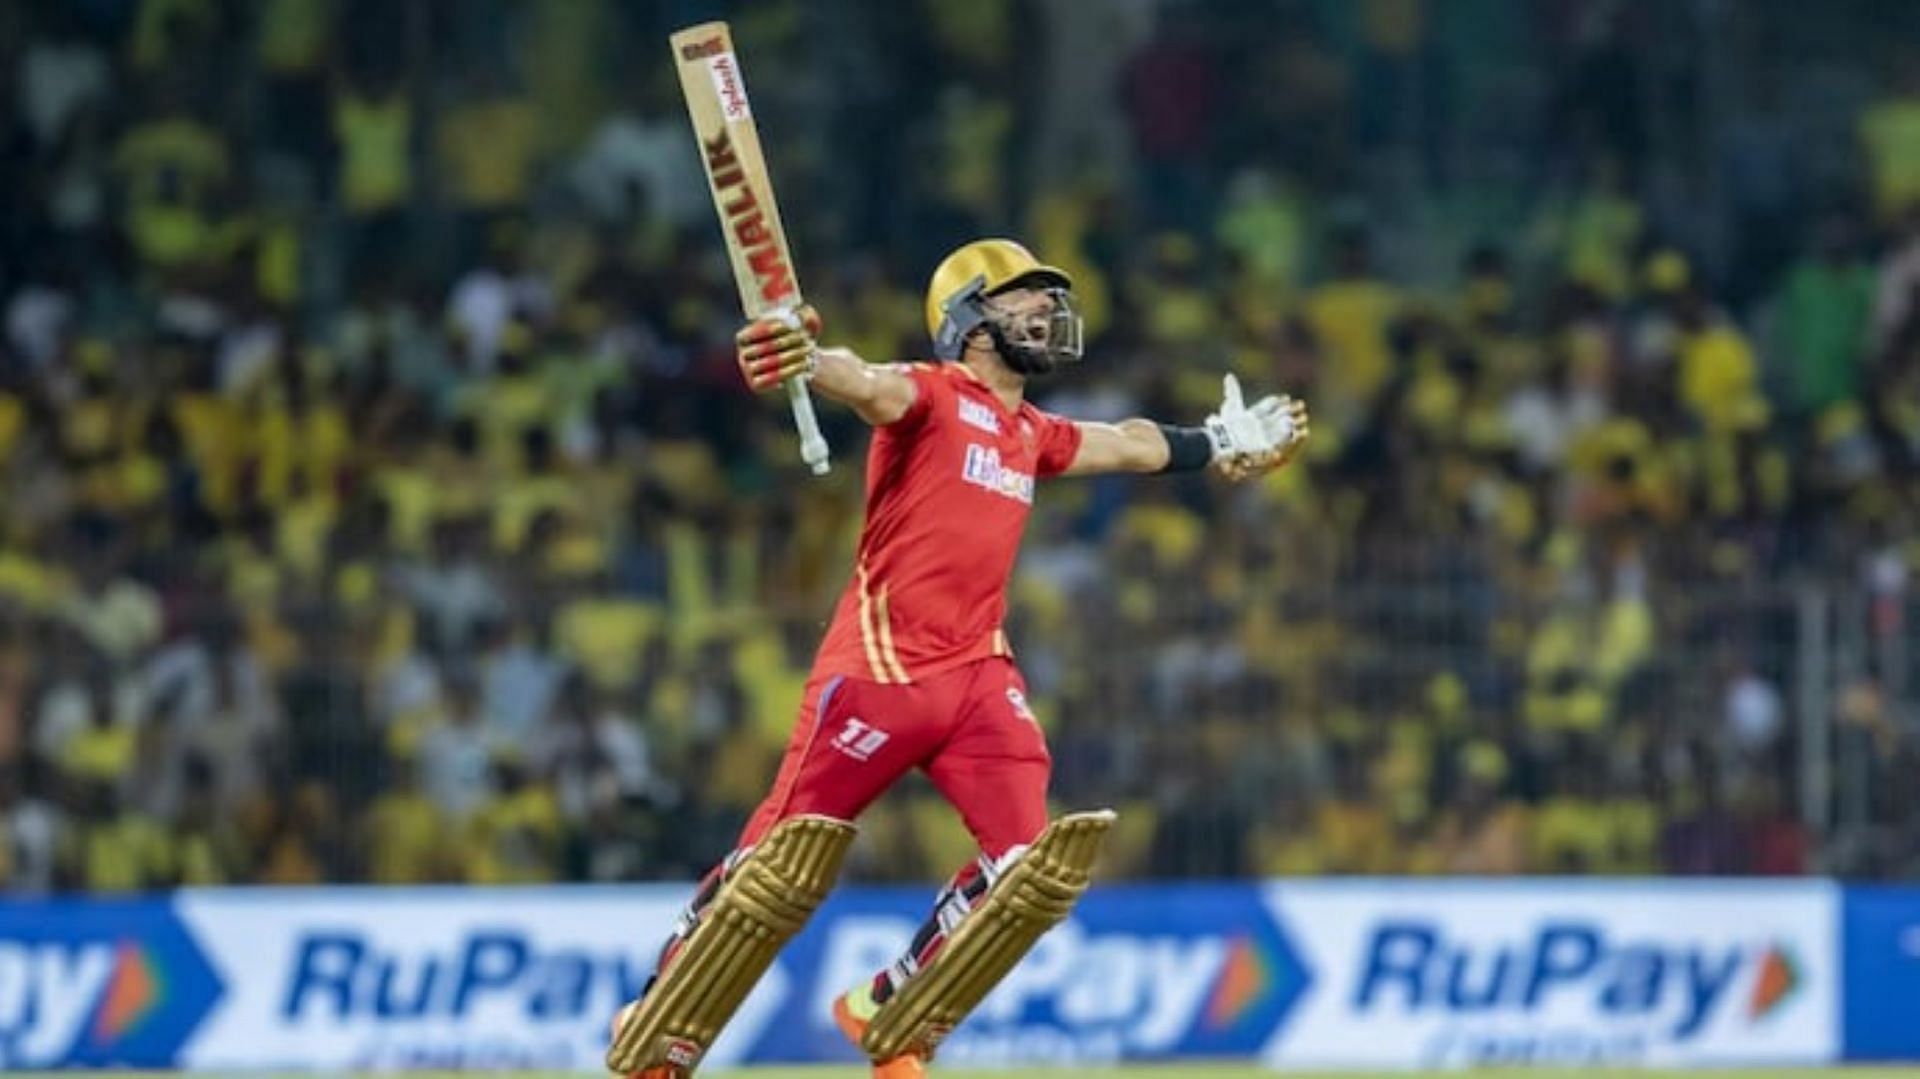 Sikandar Raza has been left out of the two games since the CSK win